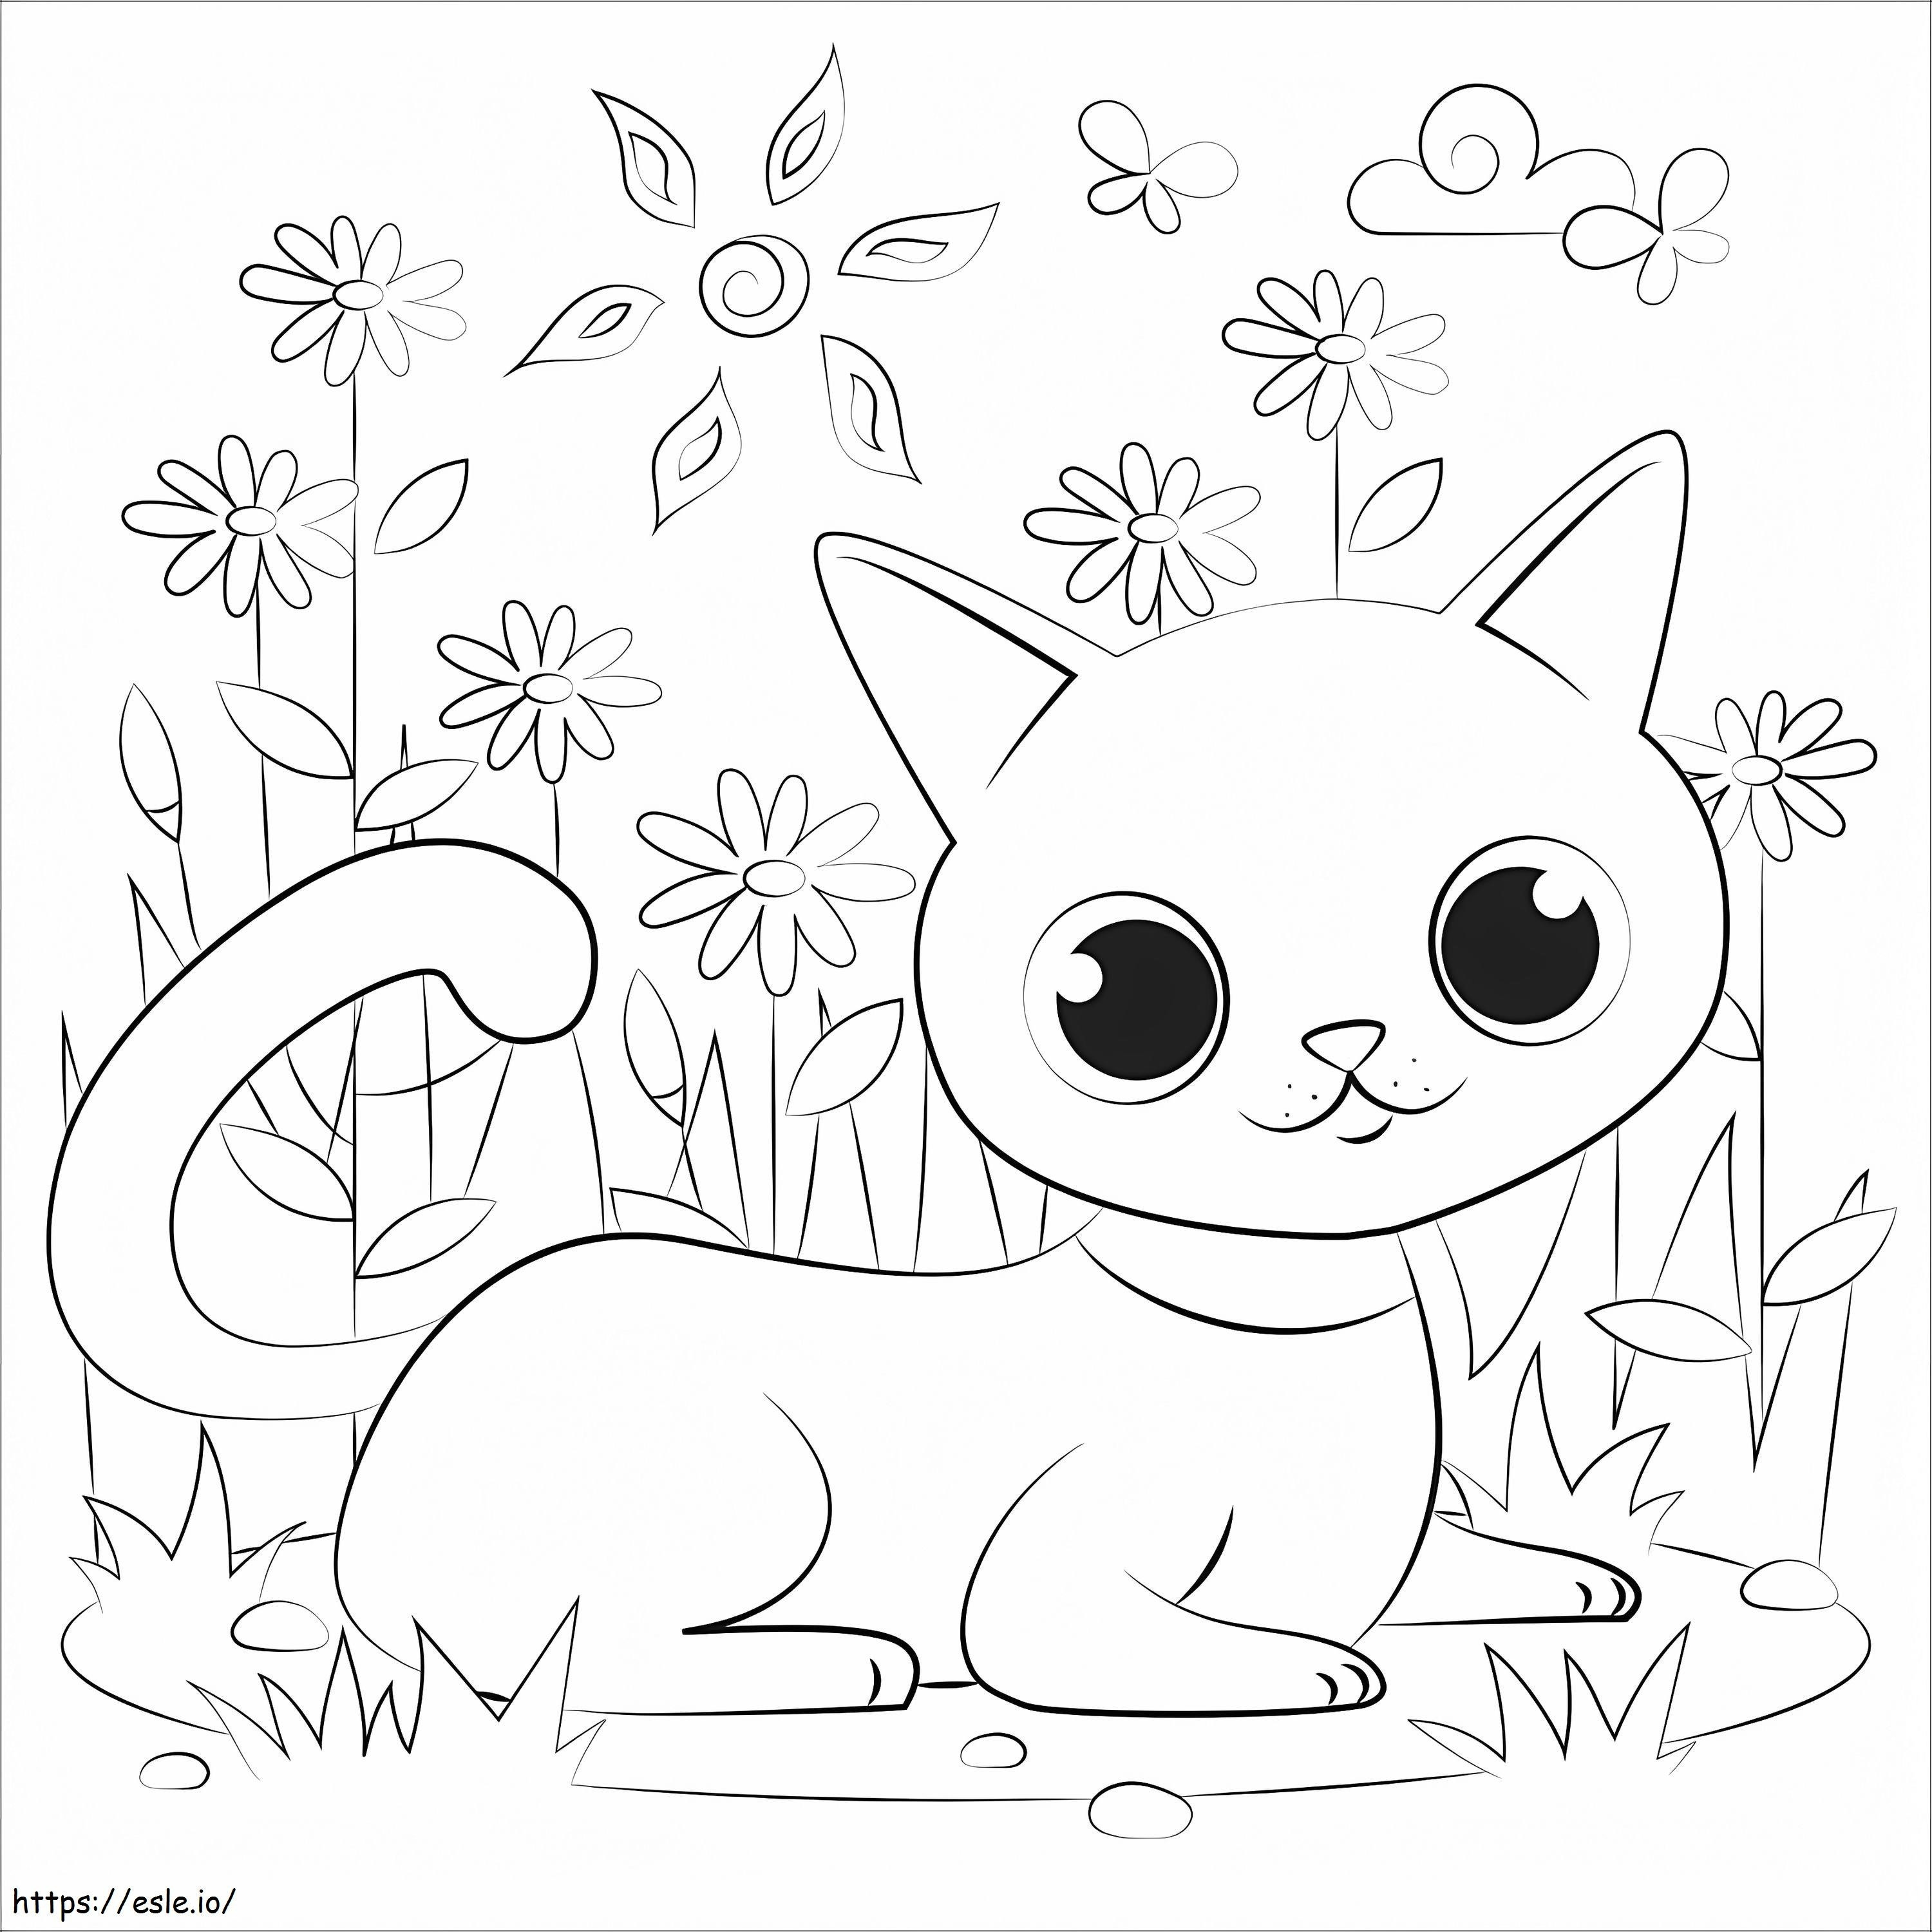 Adorable Cat coloring page